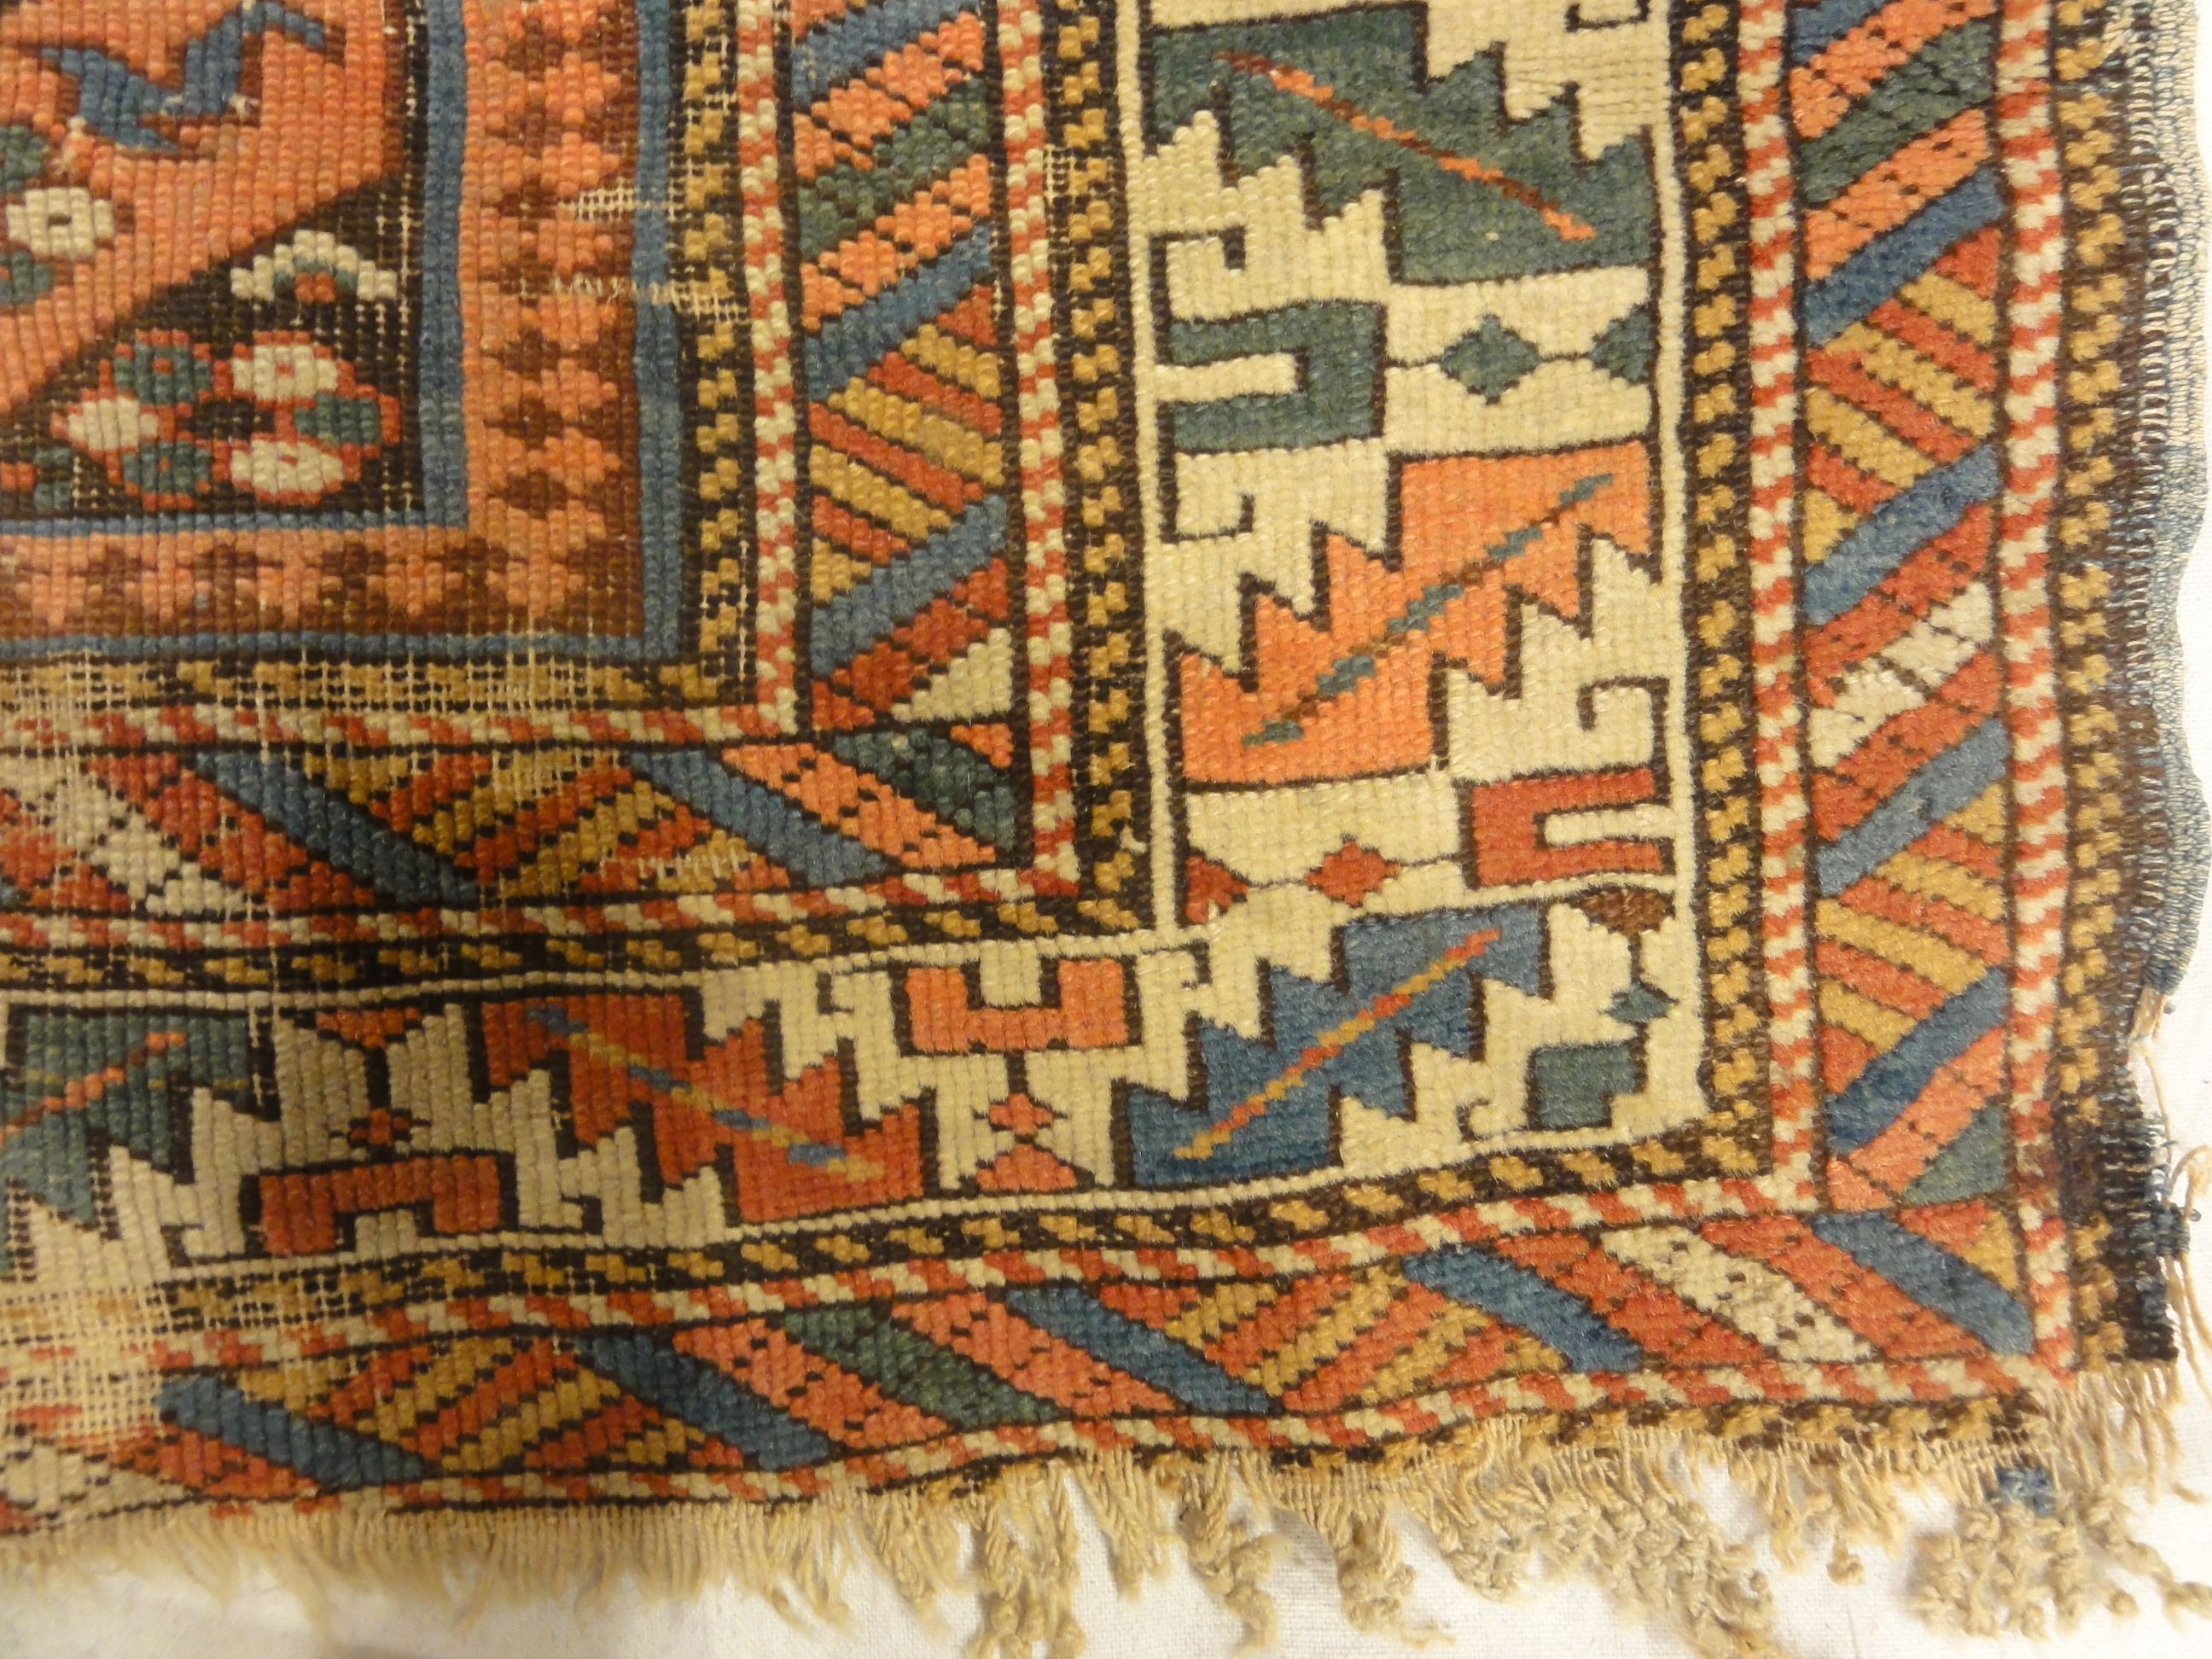 Antique Kuba East Caucasian Rug. A piece of genuine authentic woven carpet art sold by Santa Barbara Design Center, Rugs and More.